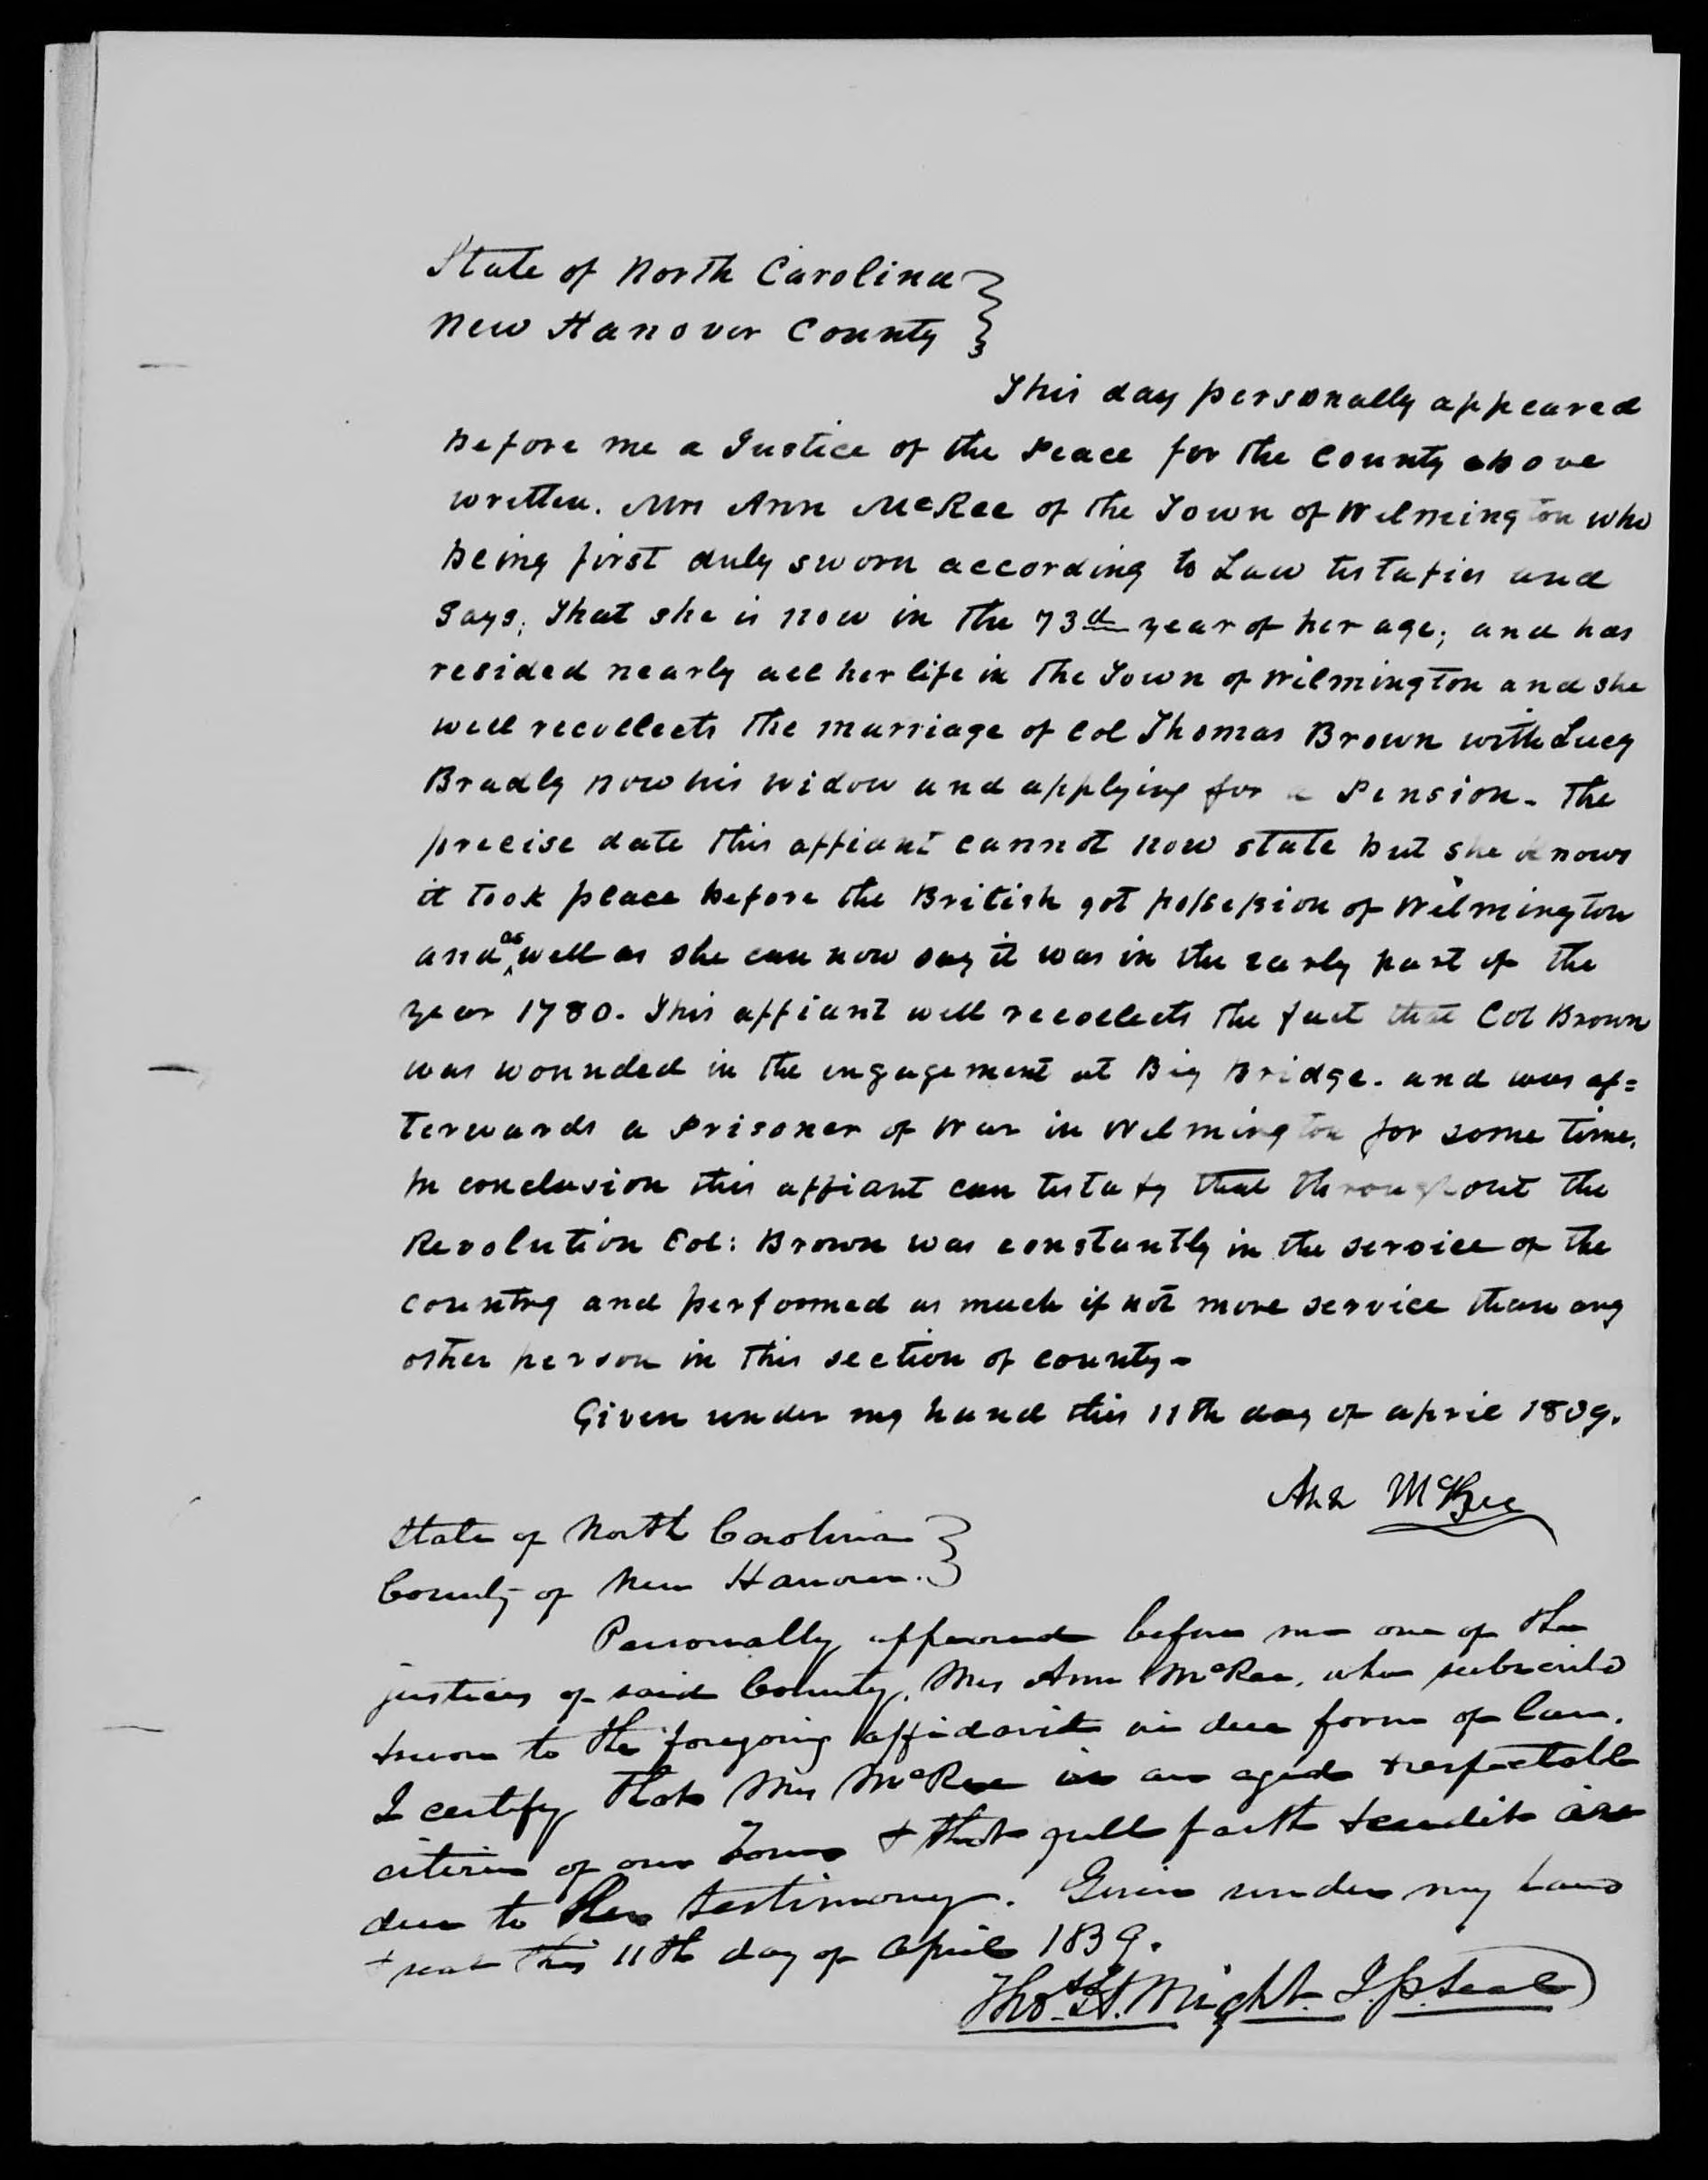 Affidavit of Ann McRee in support of a Pension Claim for Lucy Brown, 11 April 1839